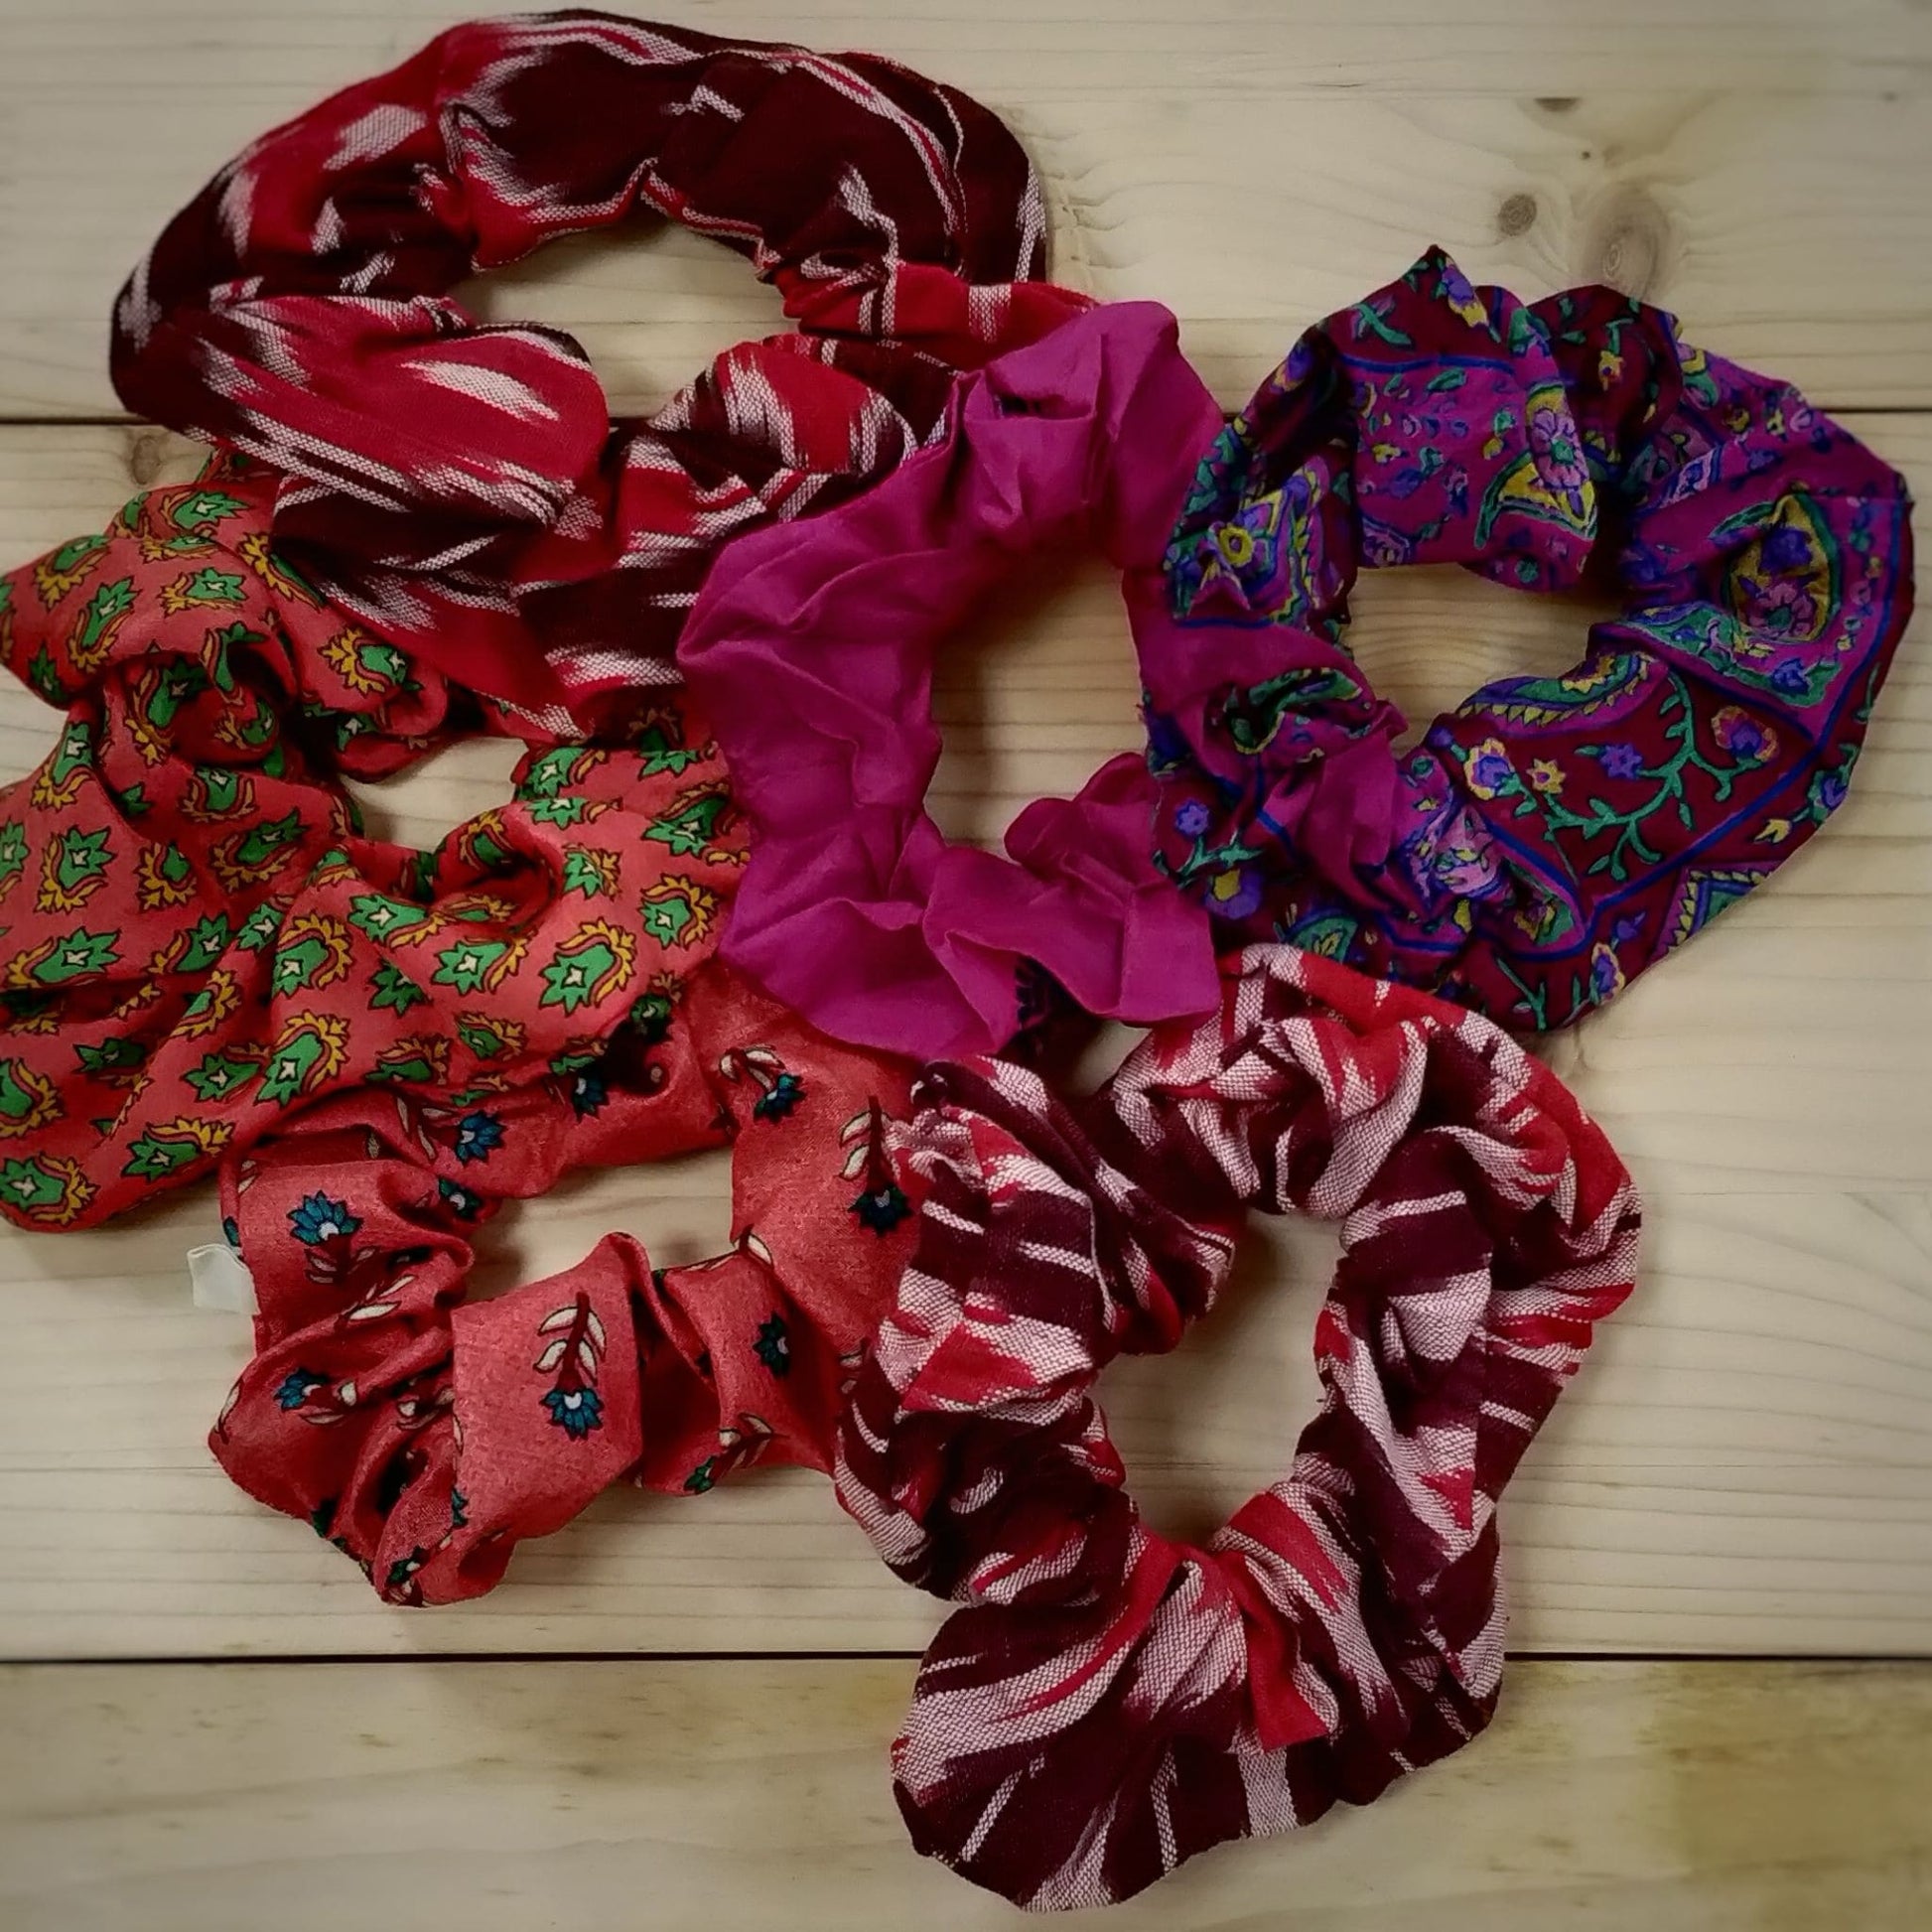 Pink and red upcycled sari scrunchies